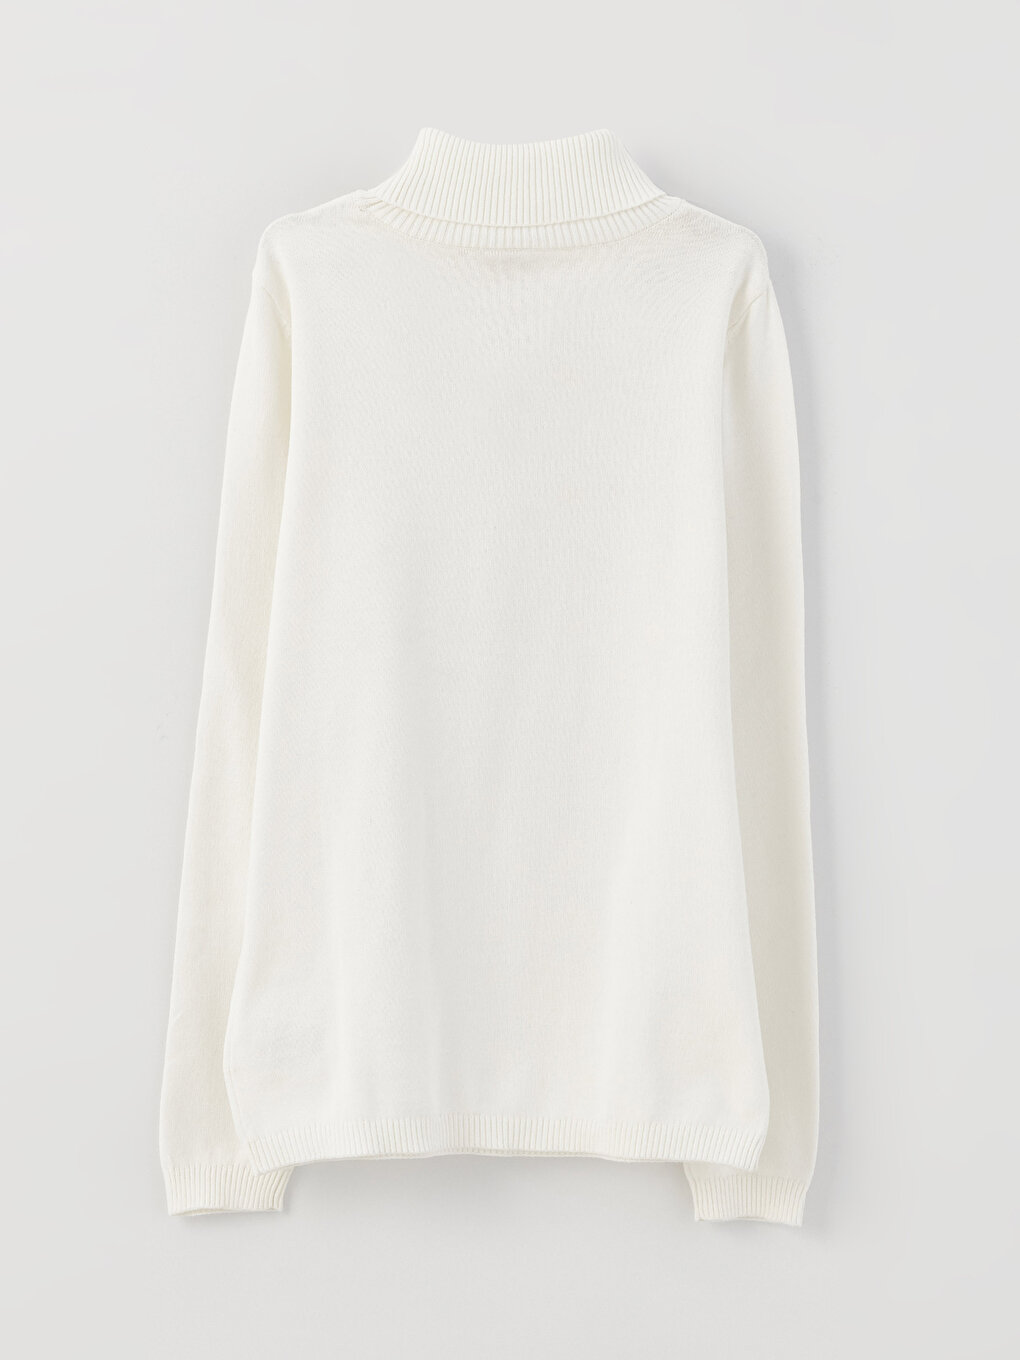 2Xtremz Textured High Neck Tricot Sweater with Long Sleeves